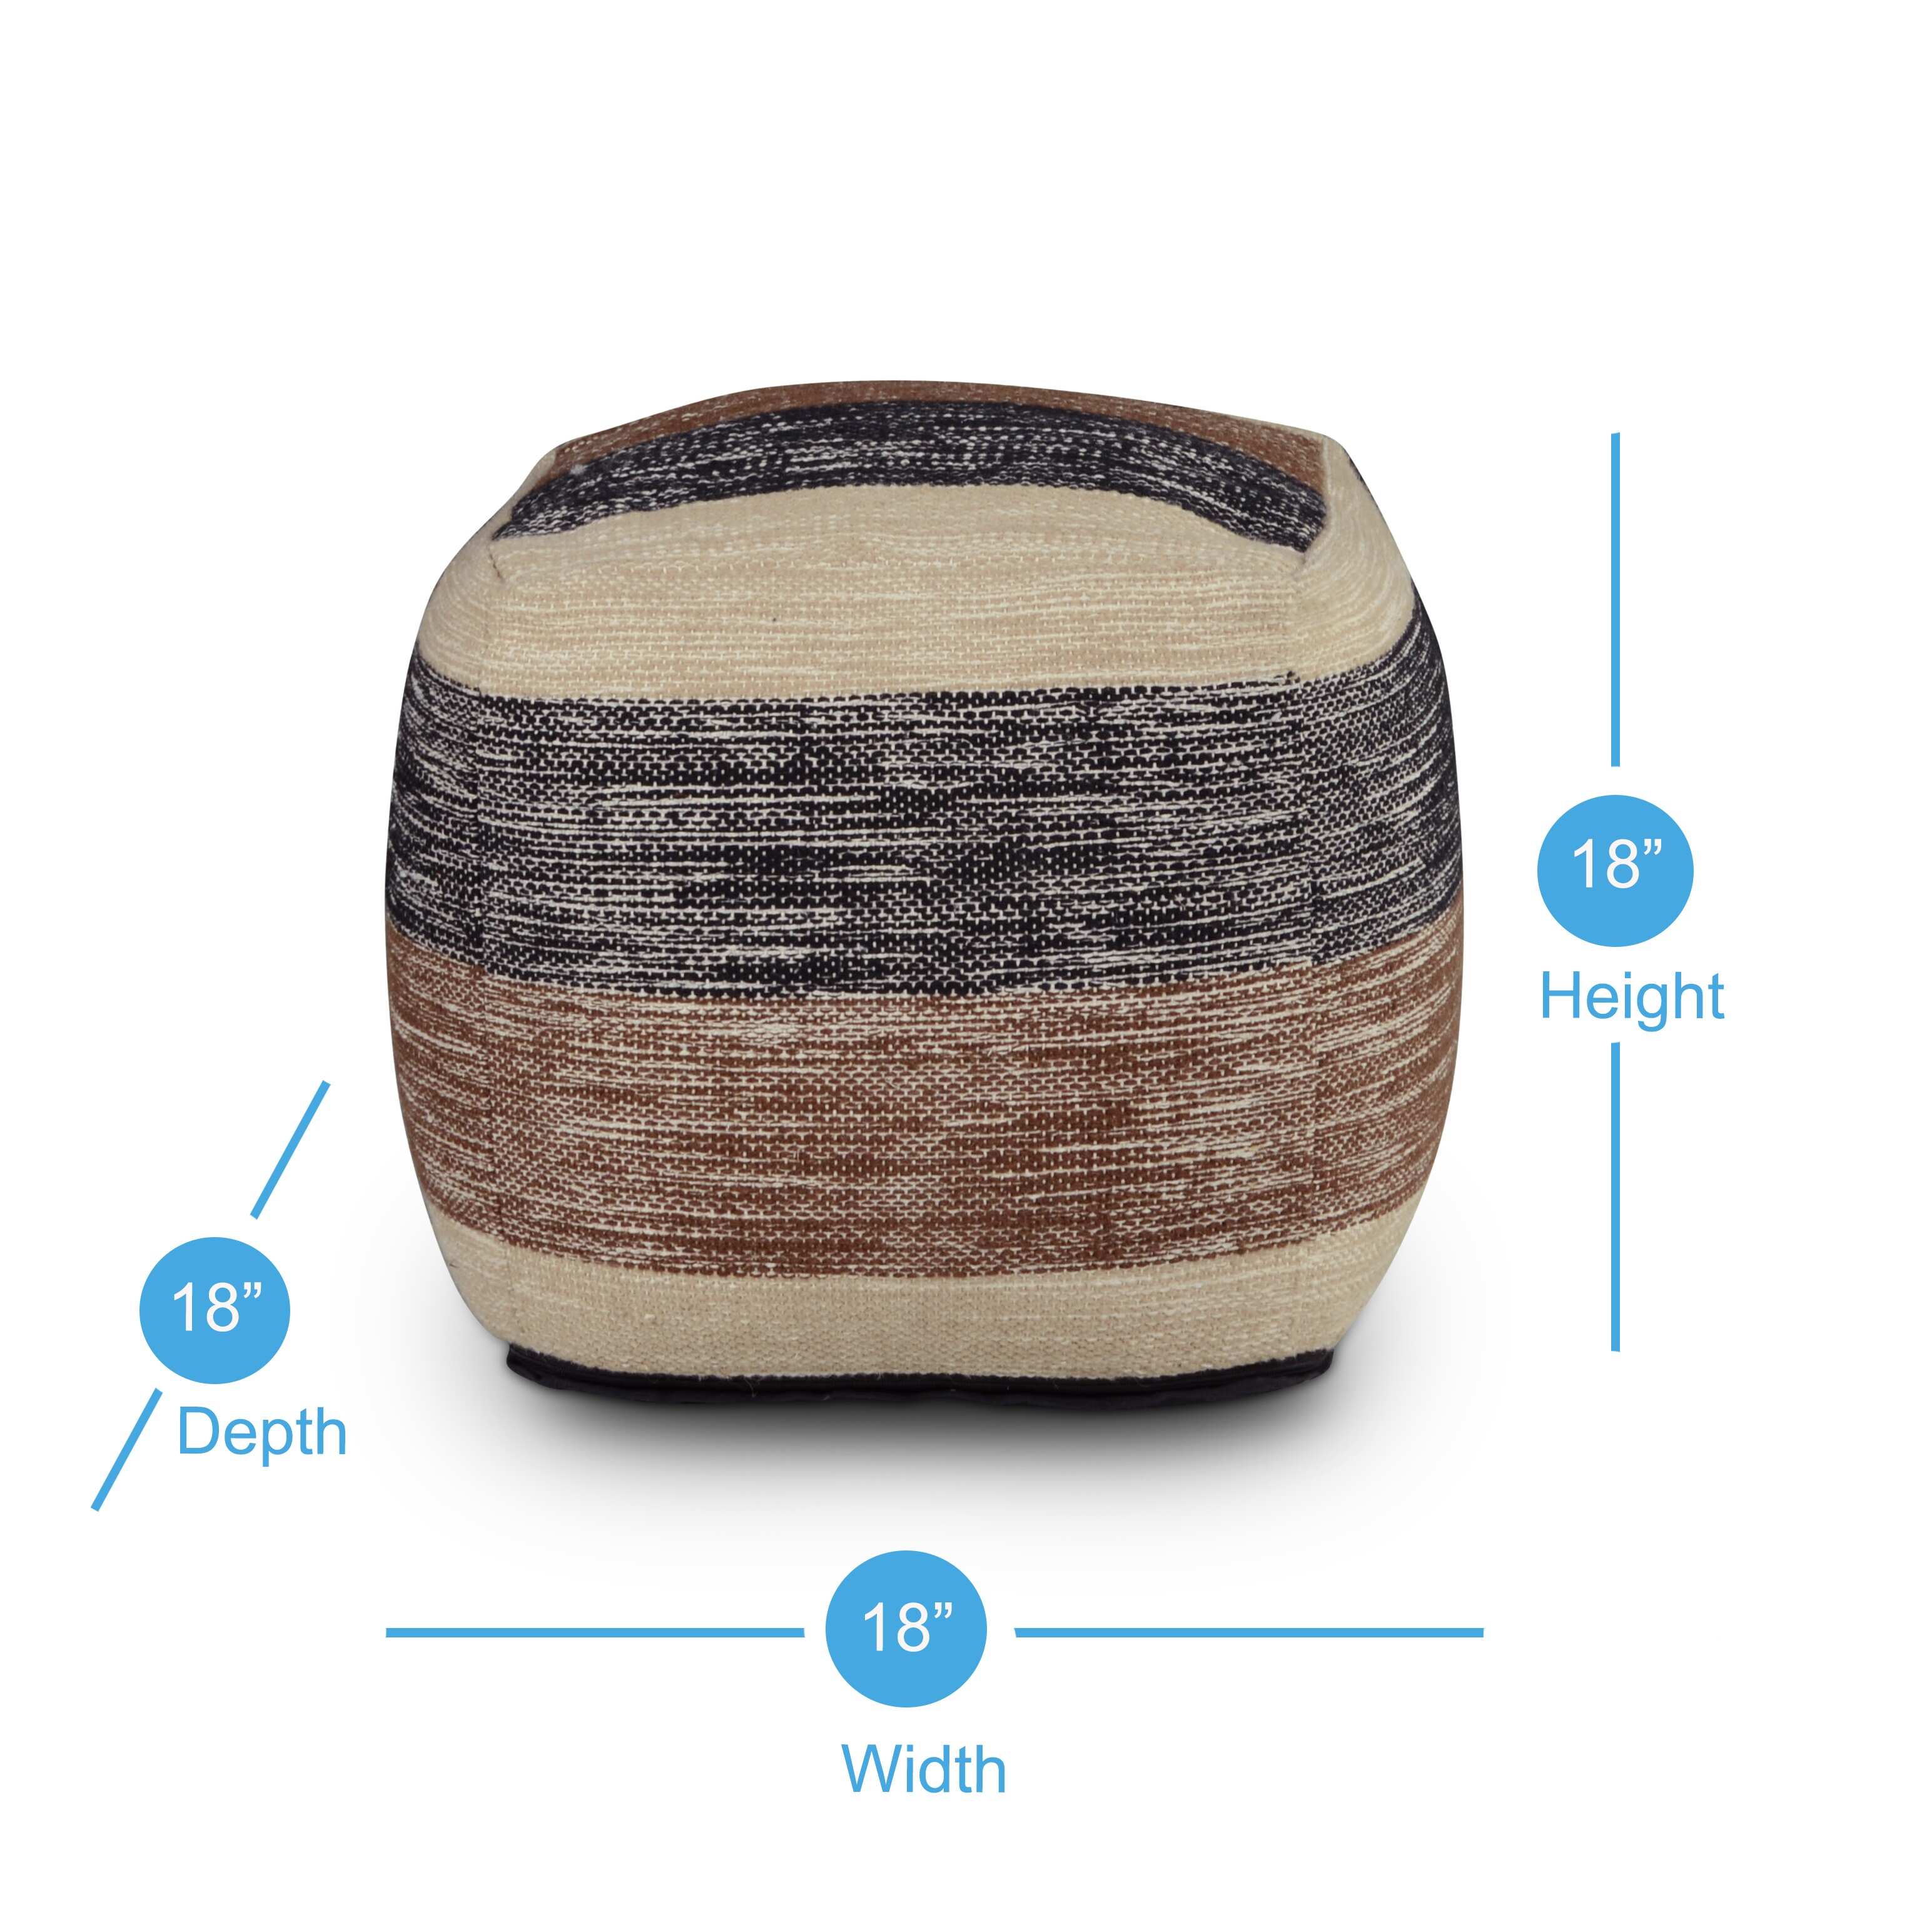 The Curated Nomad Jacona Handwoven Pouf